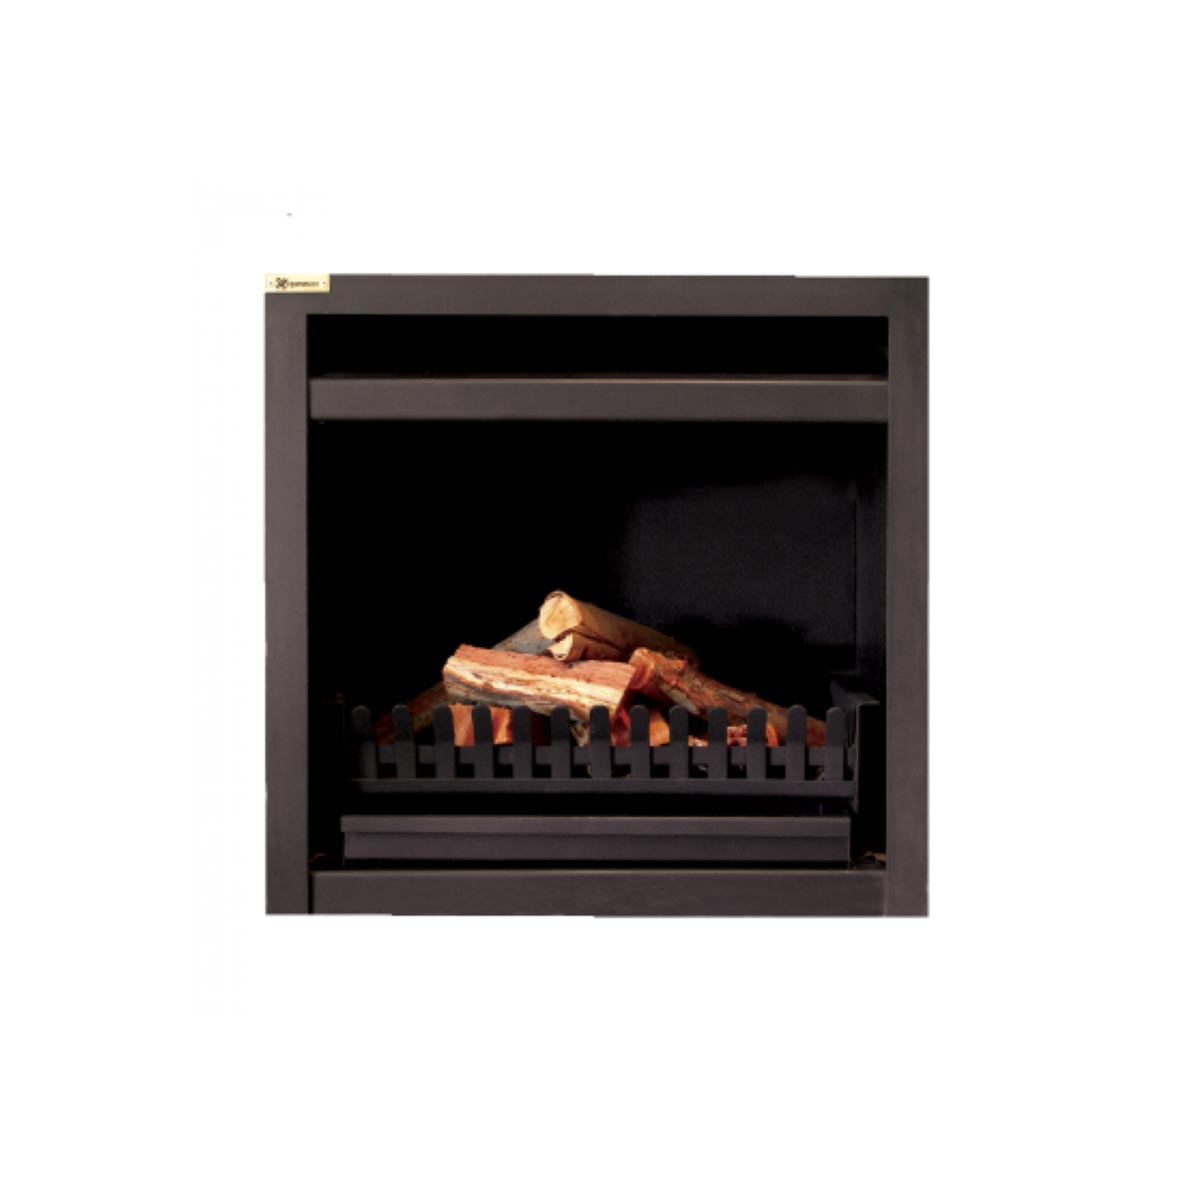 Megamaster 750 Built-in Fireplace